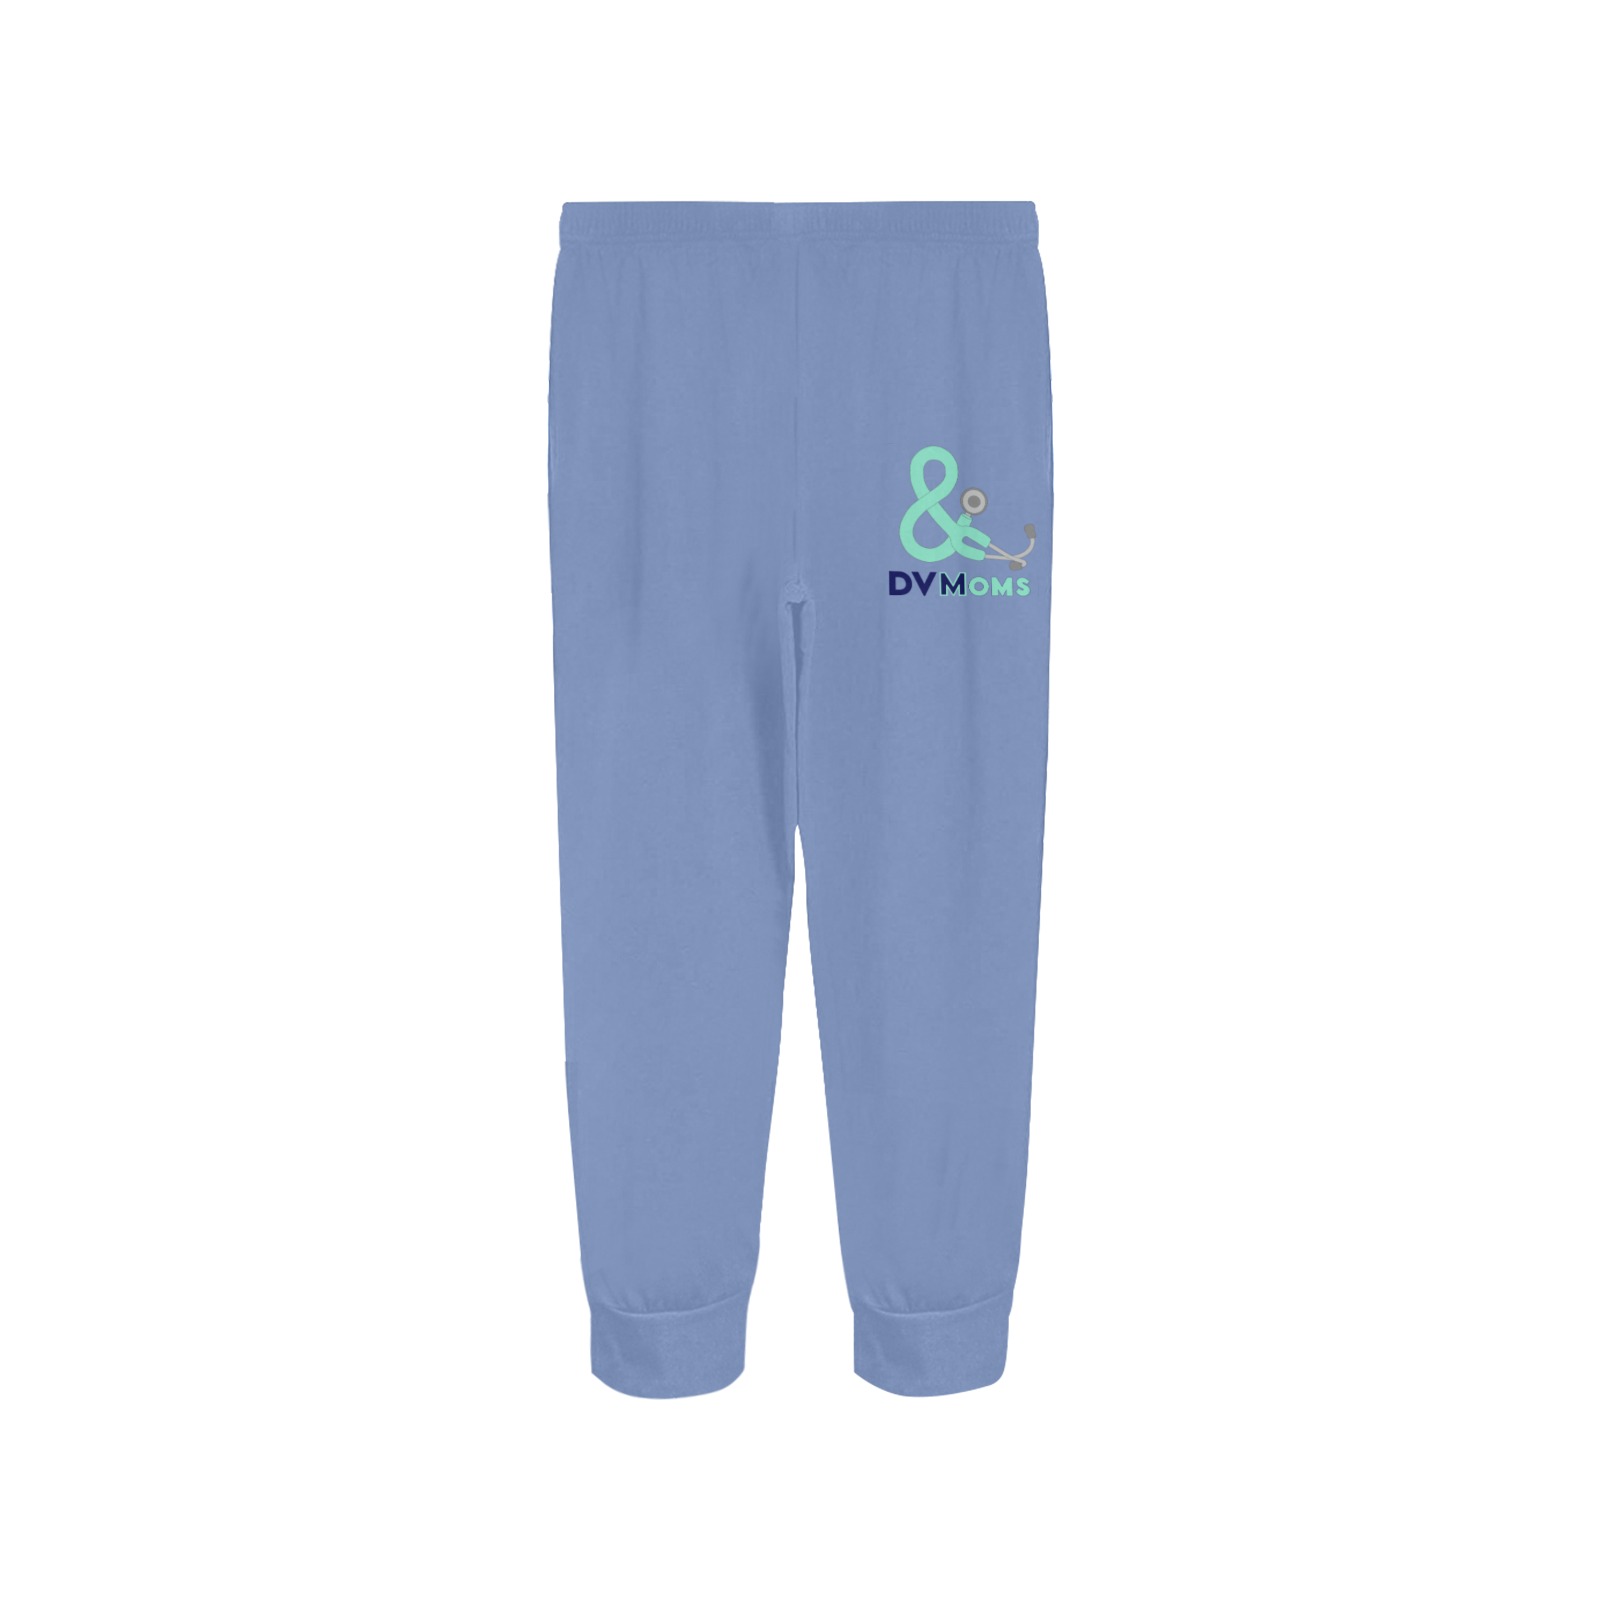 Pants light blue with single logo Women's All Over Print Pajama Trousers